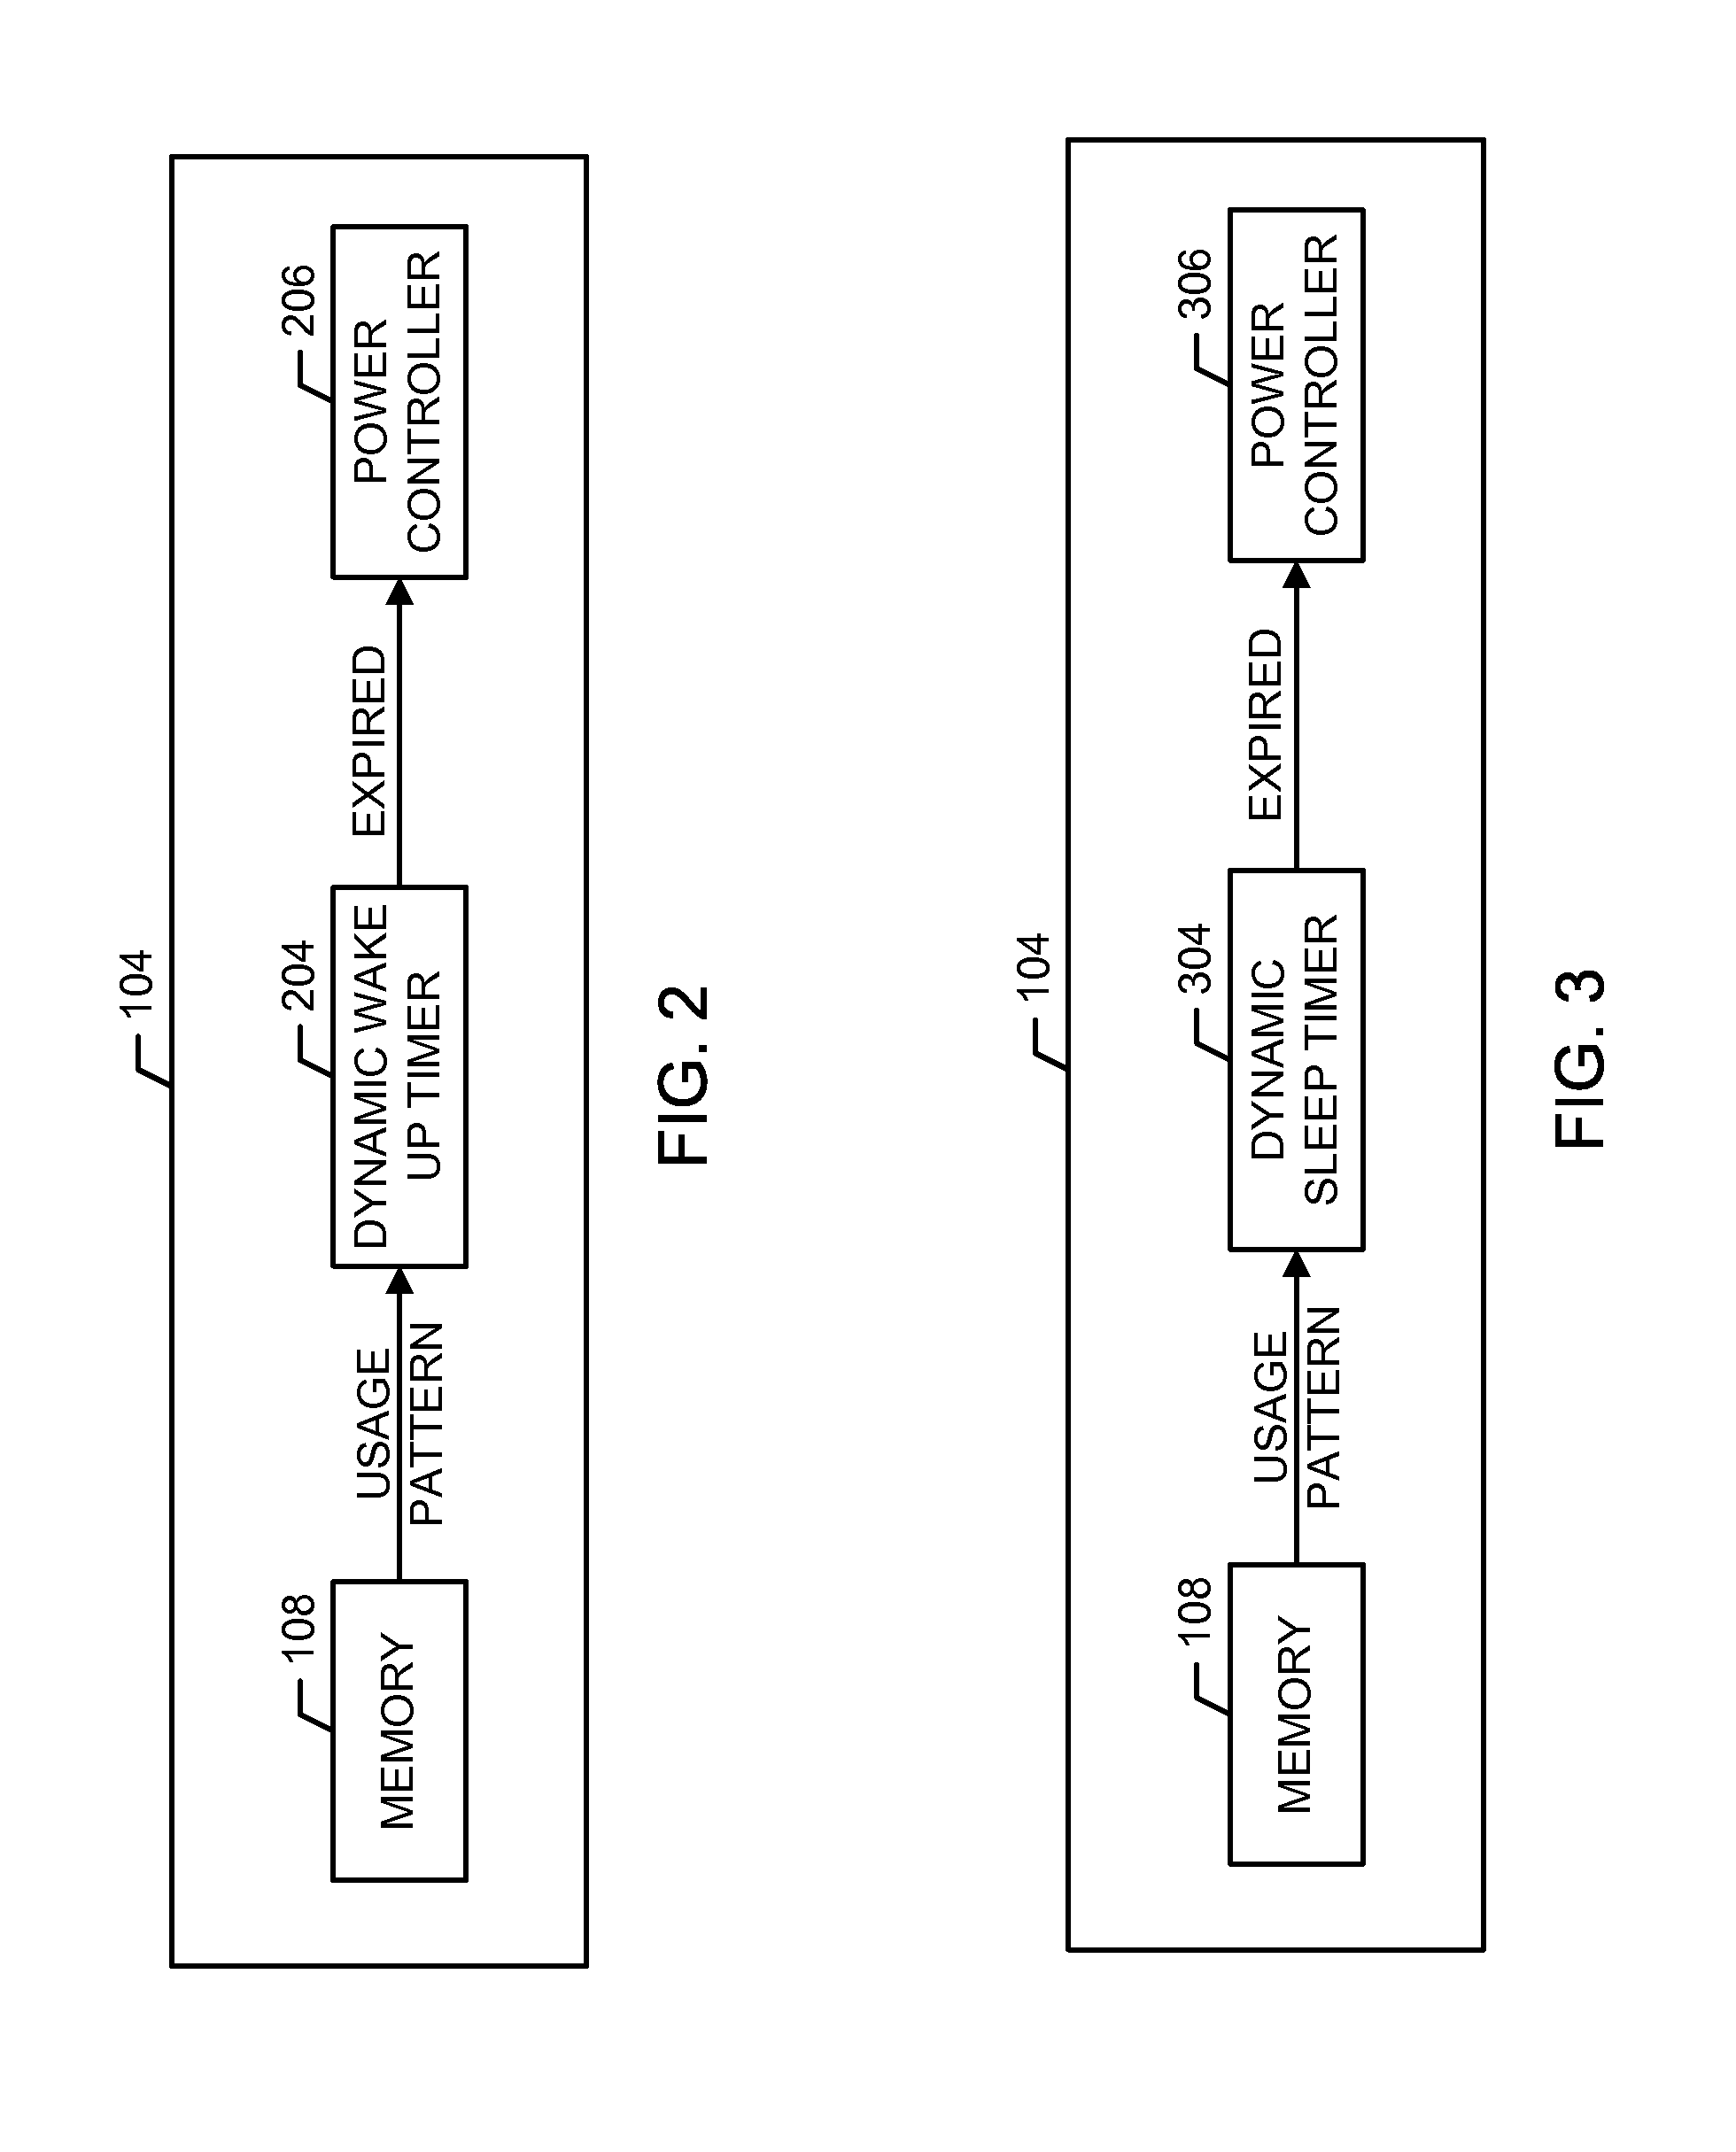 Methods and apparatus for dynamically adjusting a power level of an electronic device